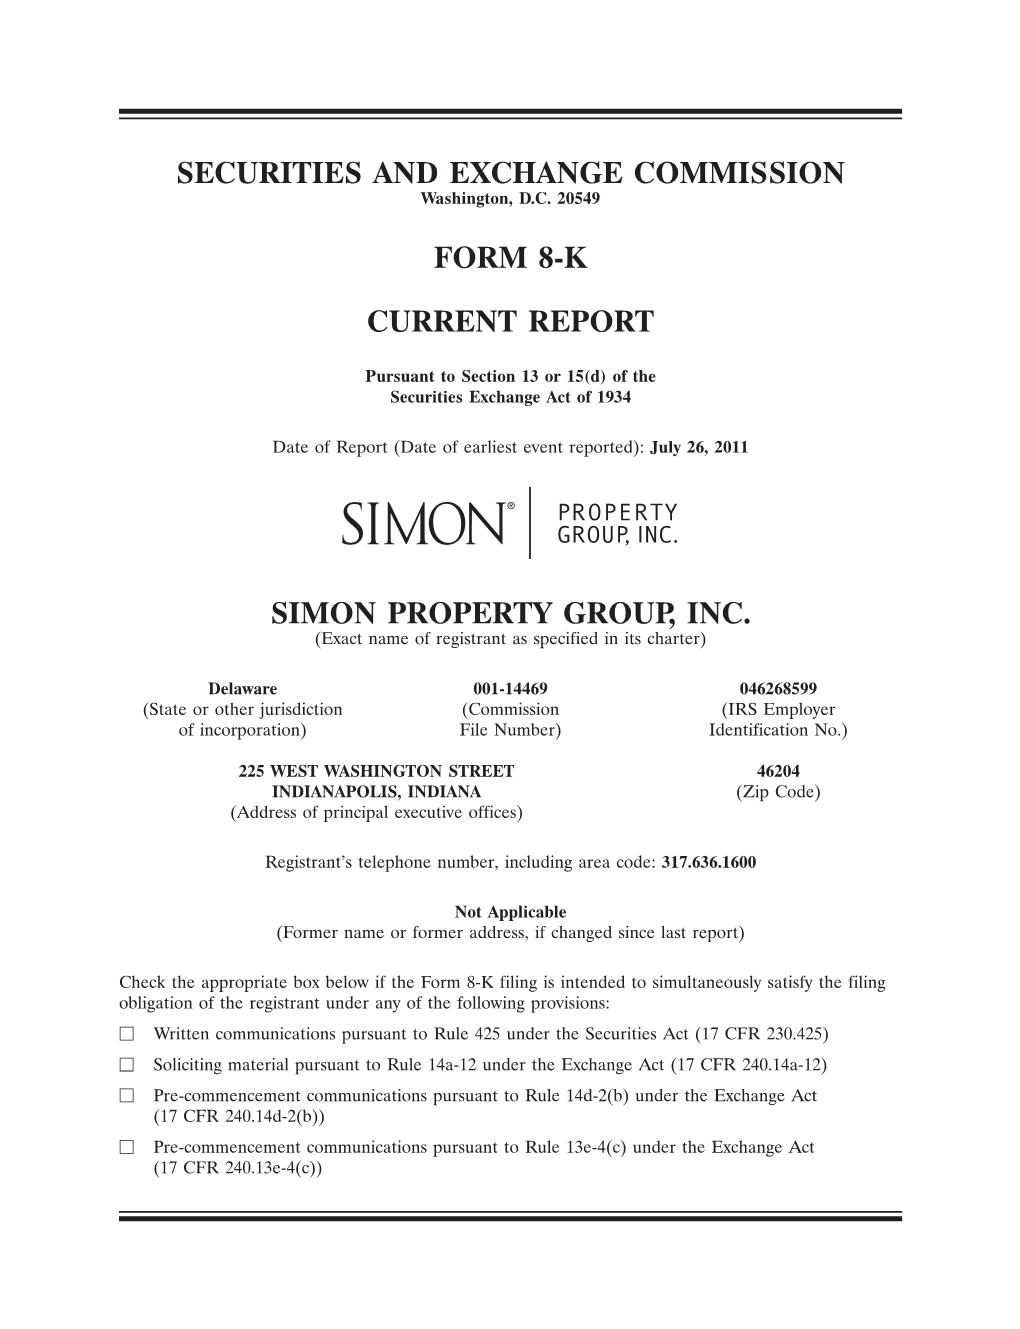 Securities and Exchange Commission Form 8-K Current Report Simon Property Group, Inc